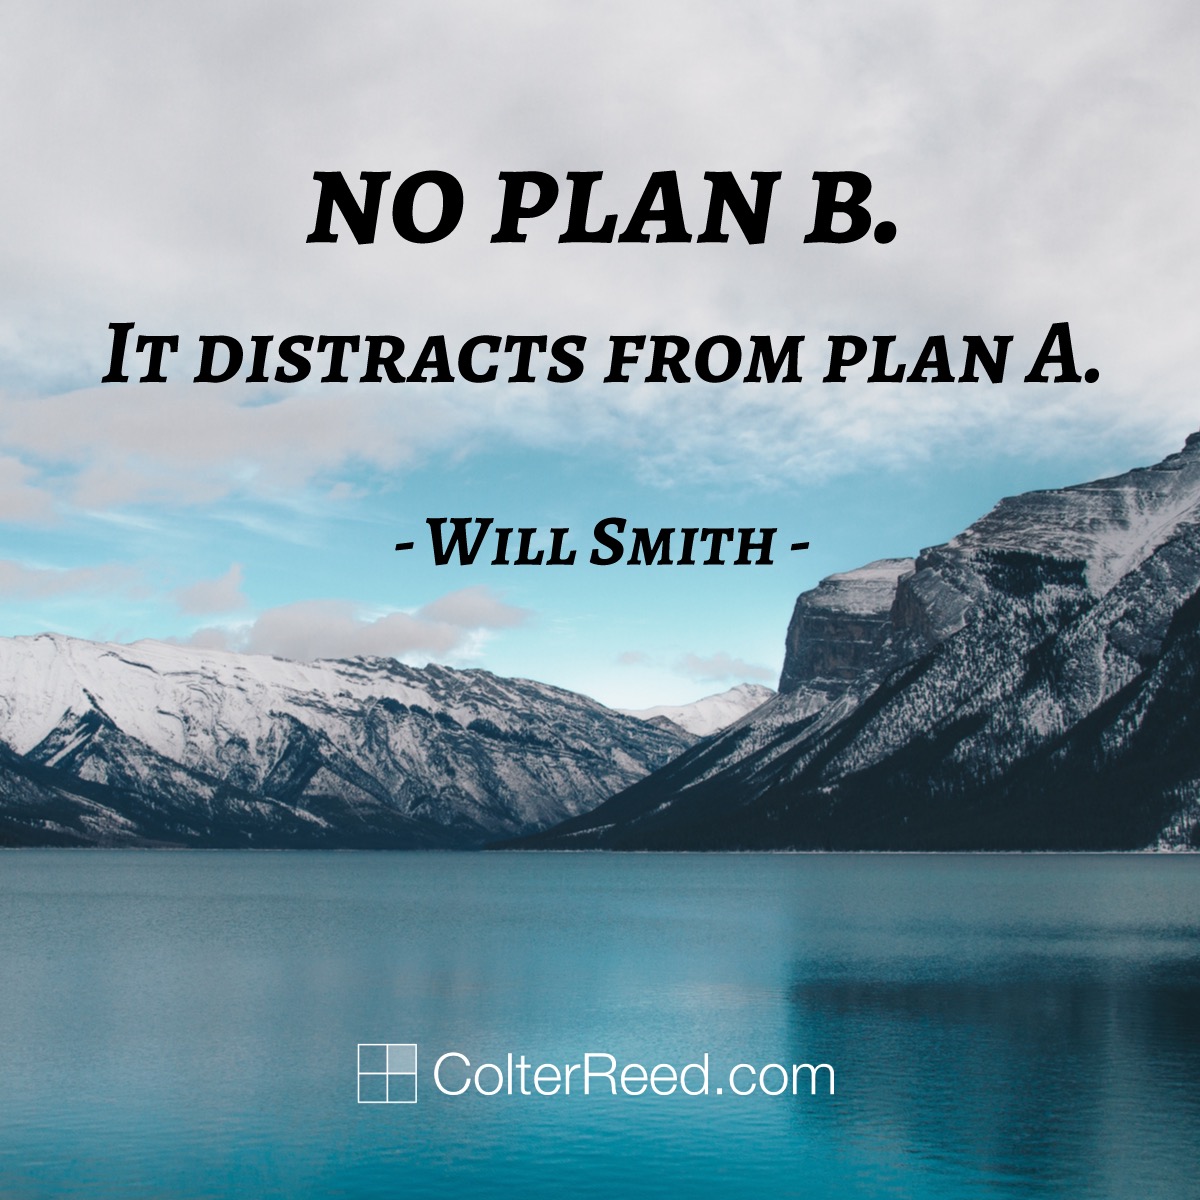 No Plan B. It distracts from Plan A. —Will Smith